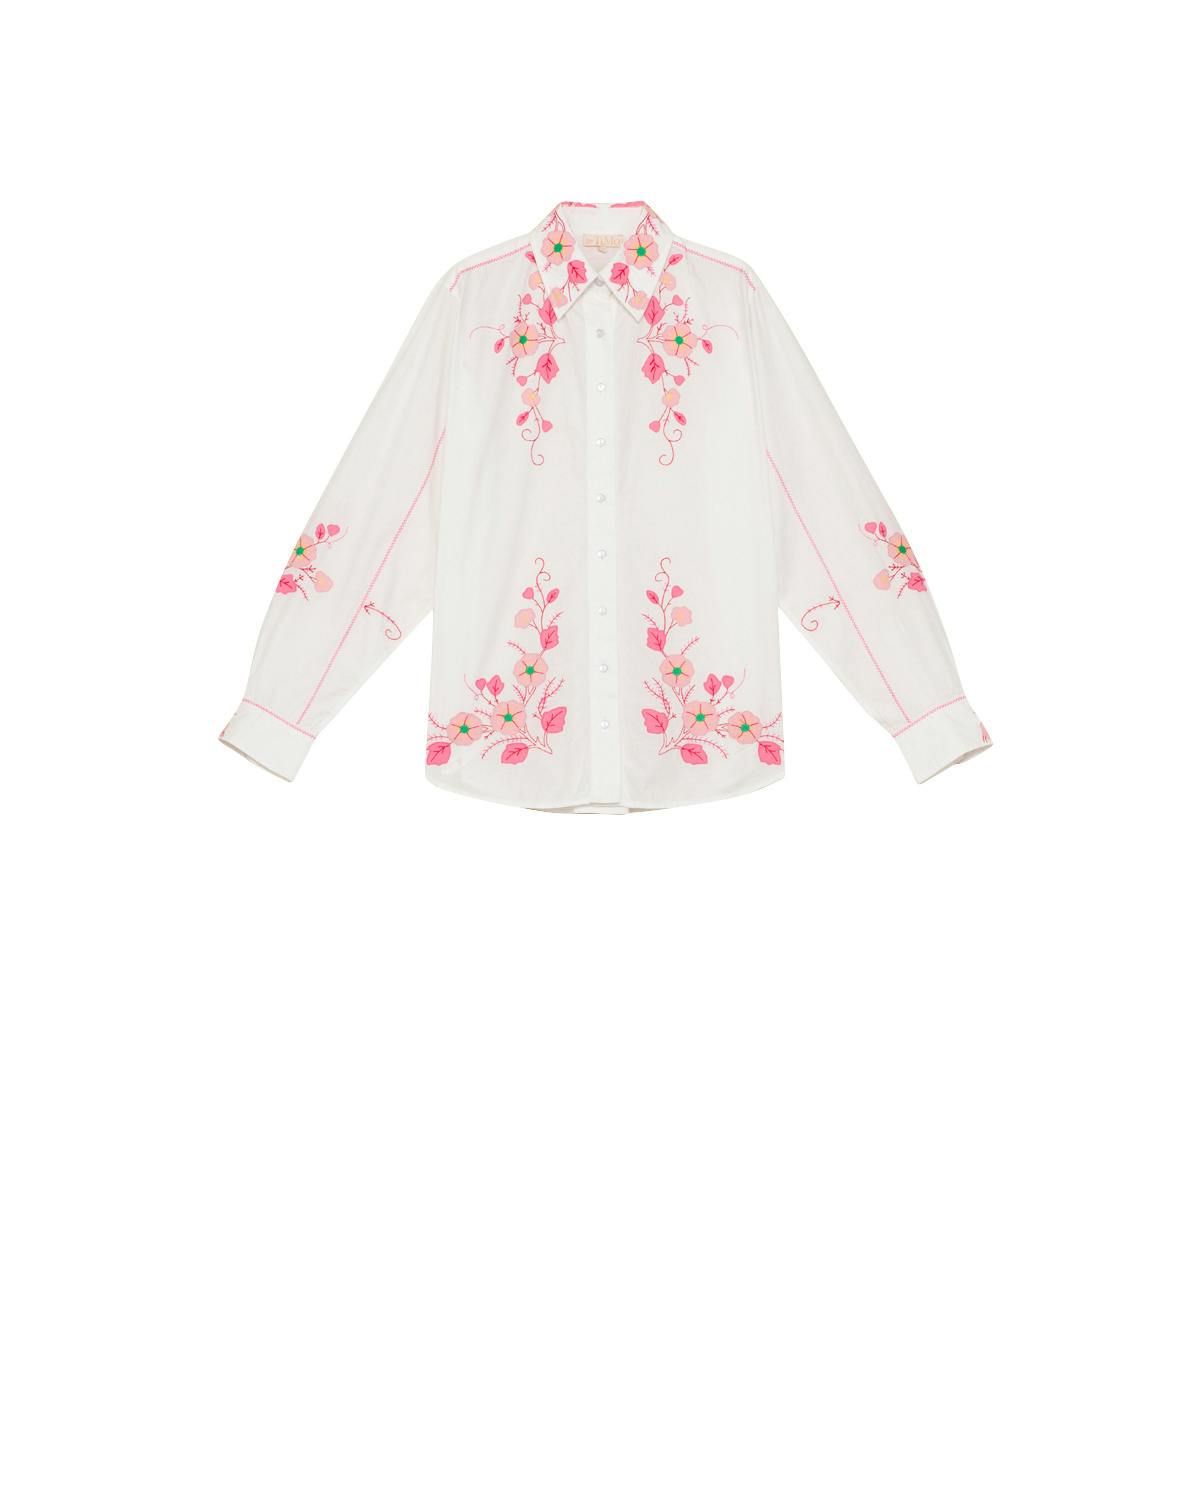 Poplin Embroidered Shirt, White With Embroidery. Image #6